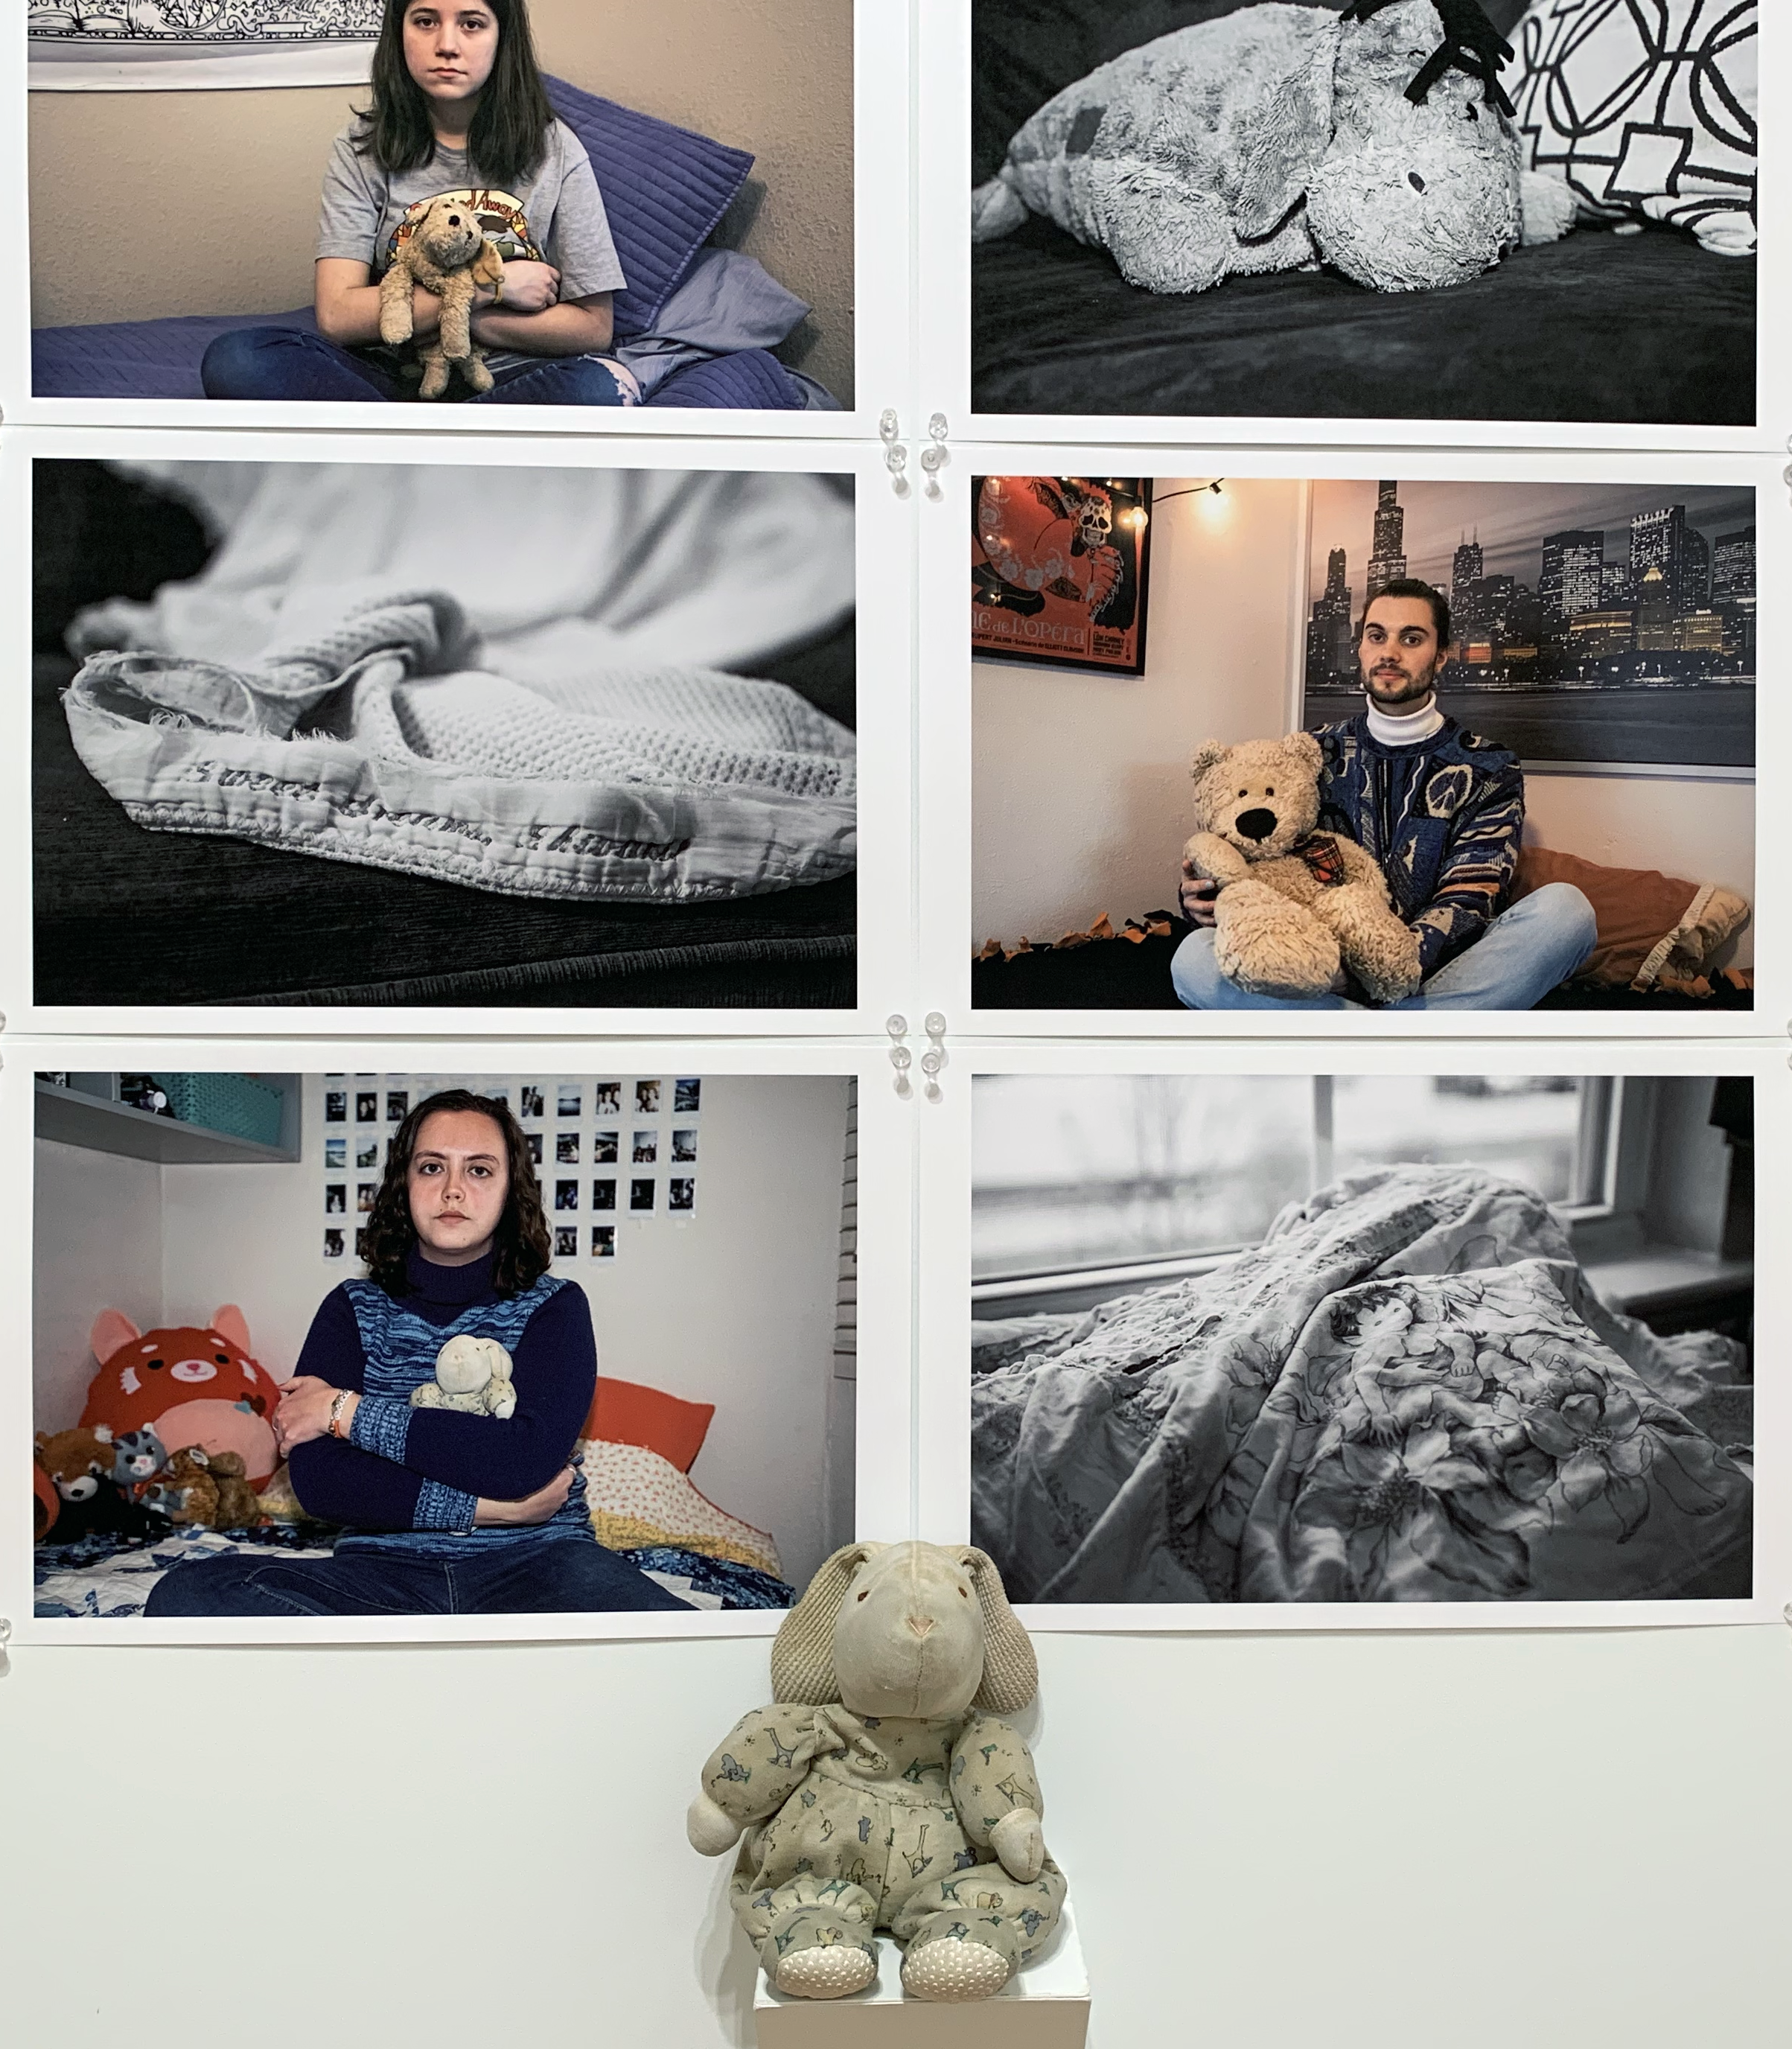 Photographs of people with baby blankets and teddy bears behind a teddy bear on a shelf.